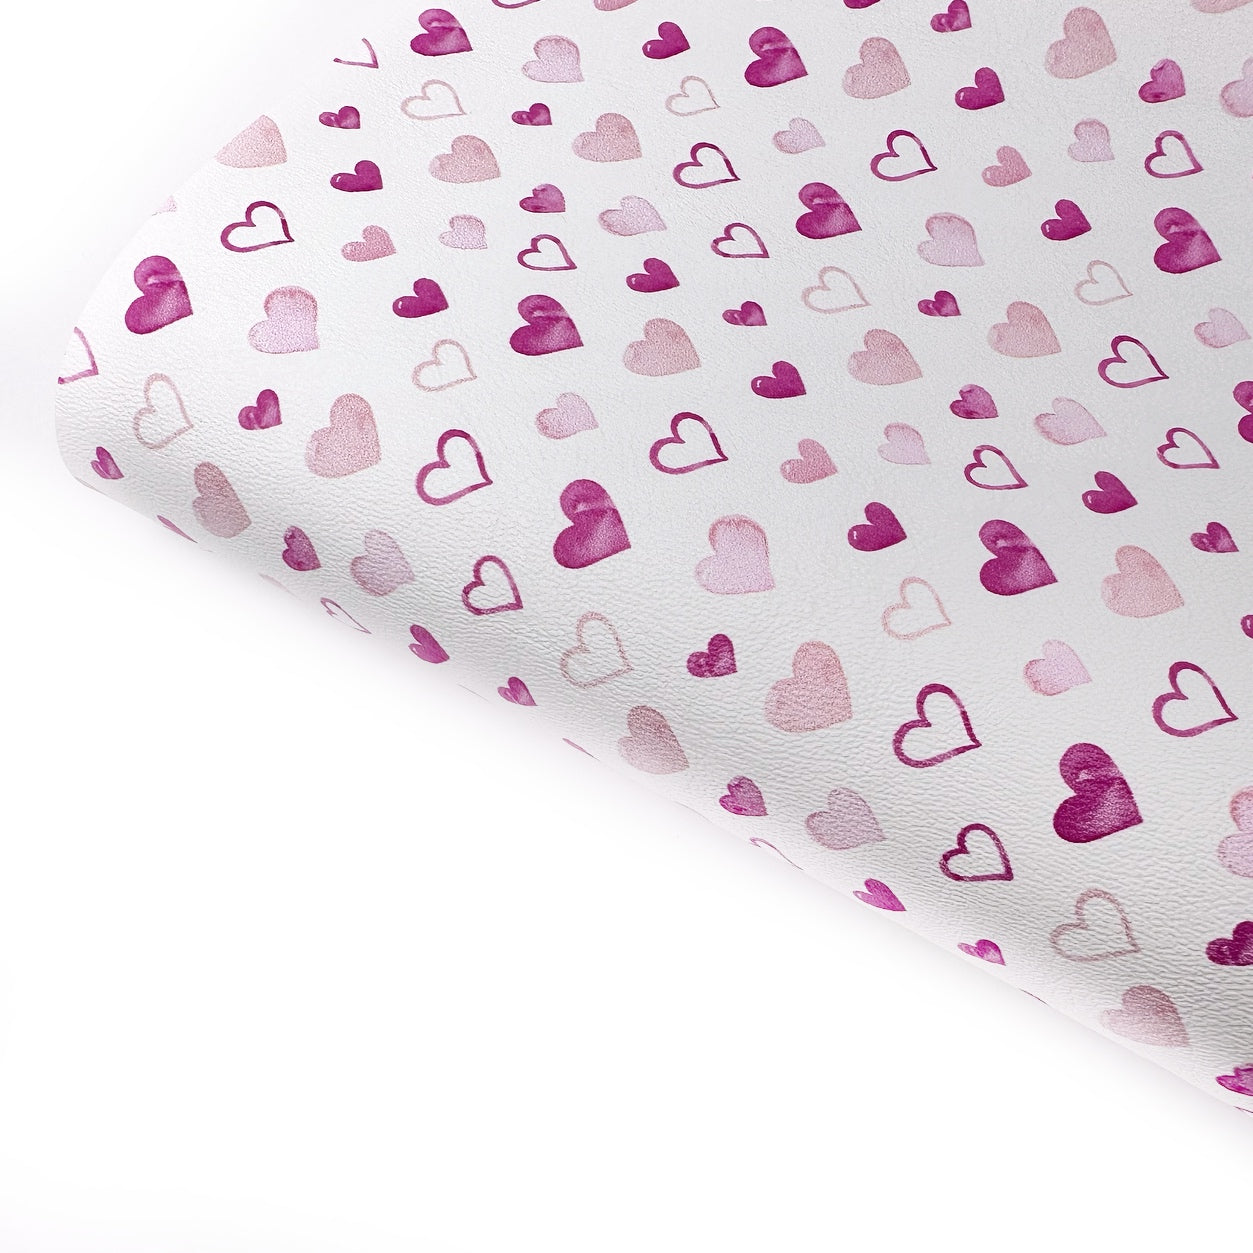 Doodle Pink Hearts Premium Faux Leather Fabric Sheets